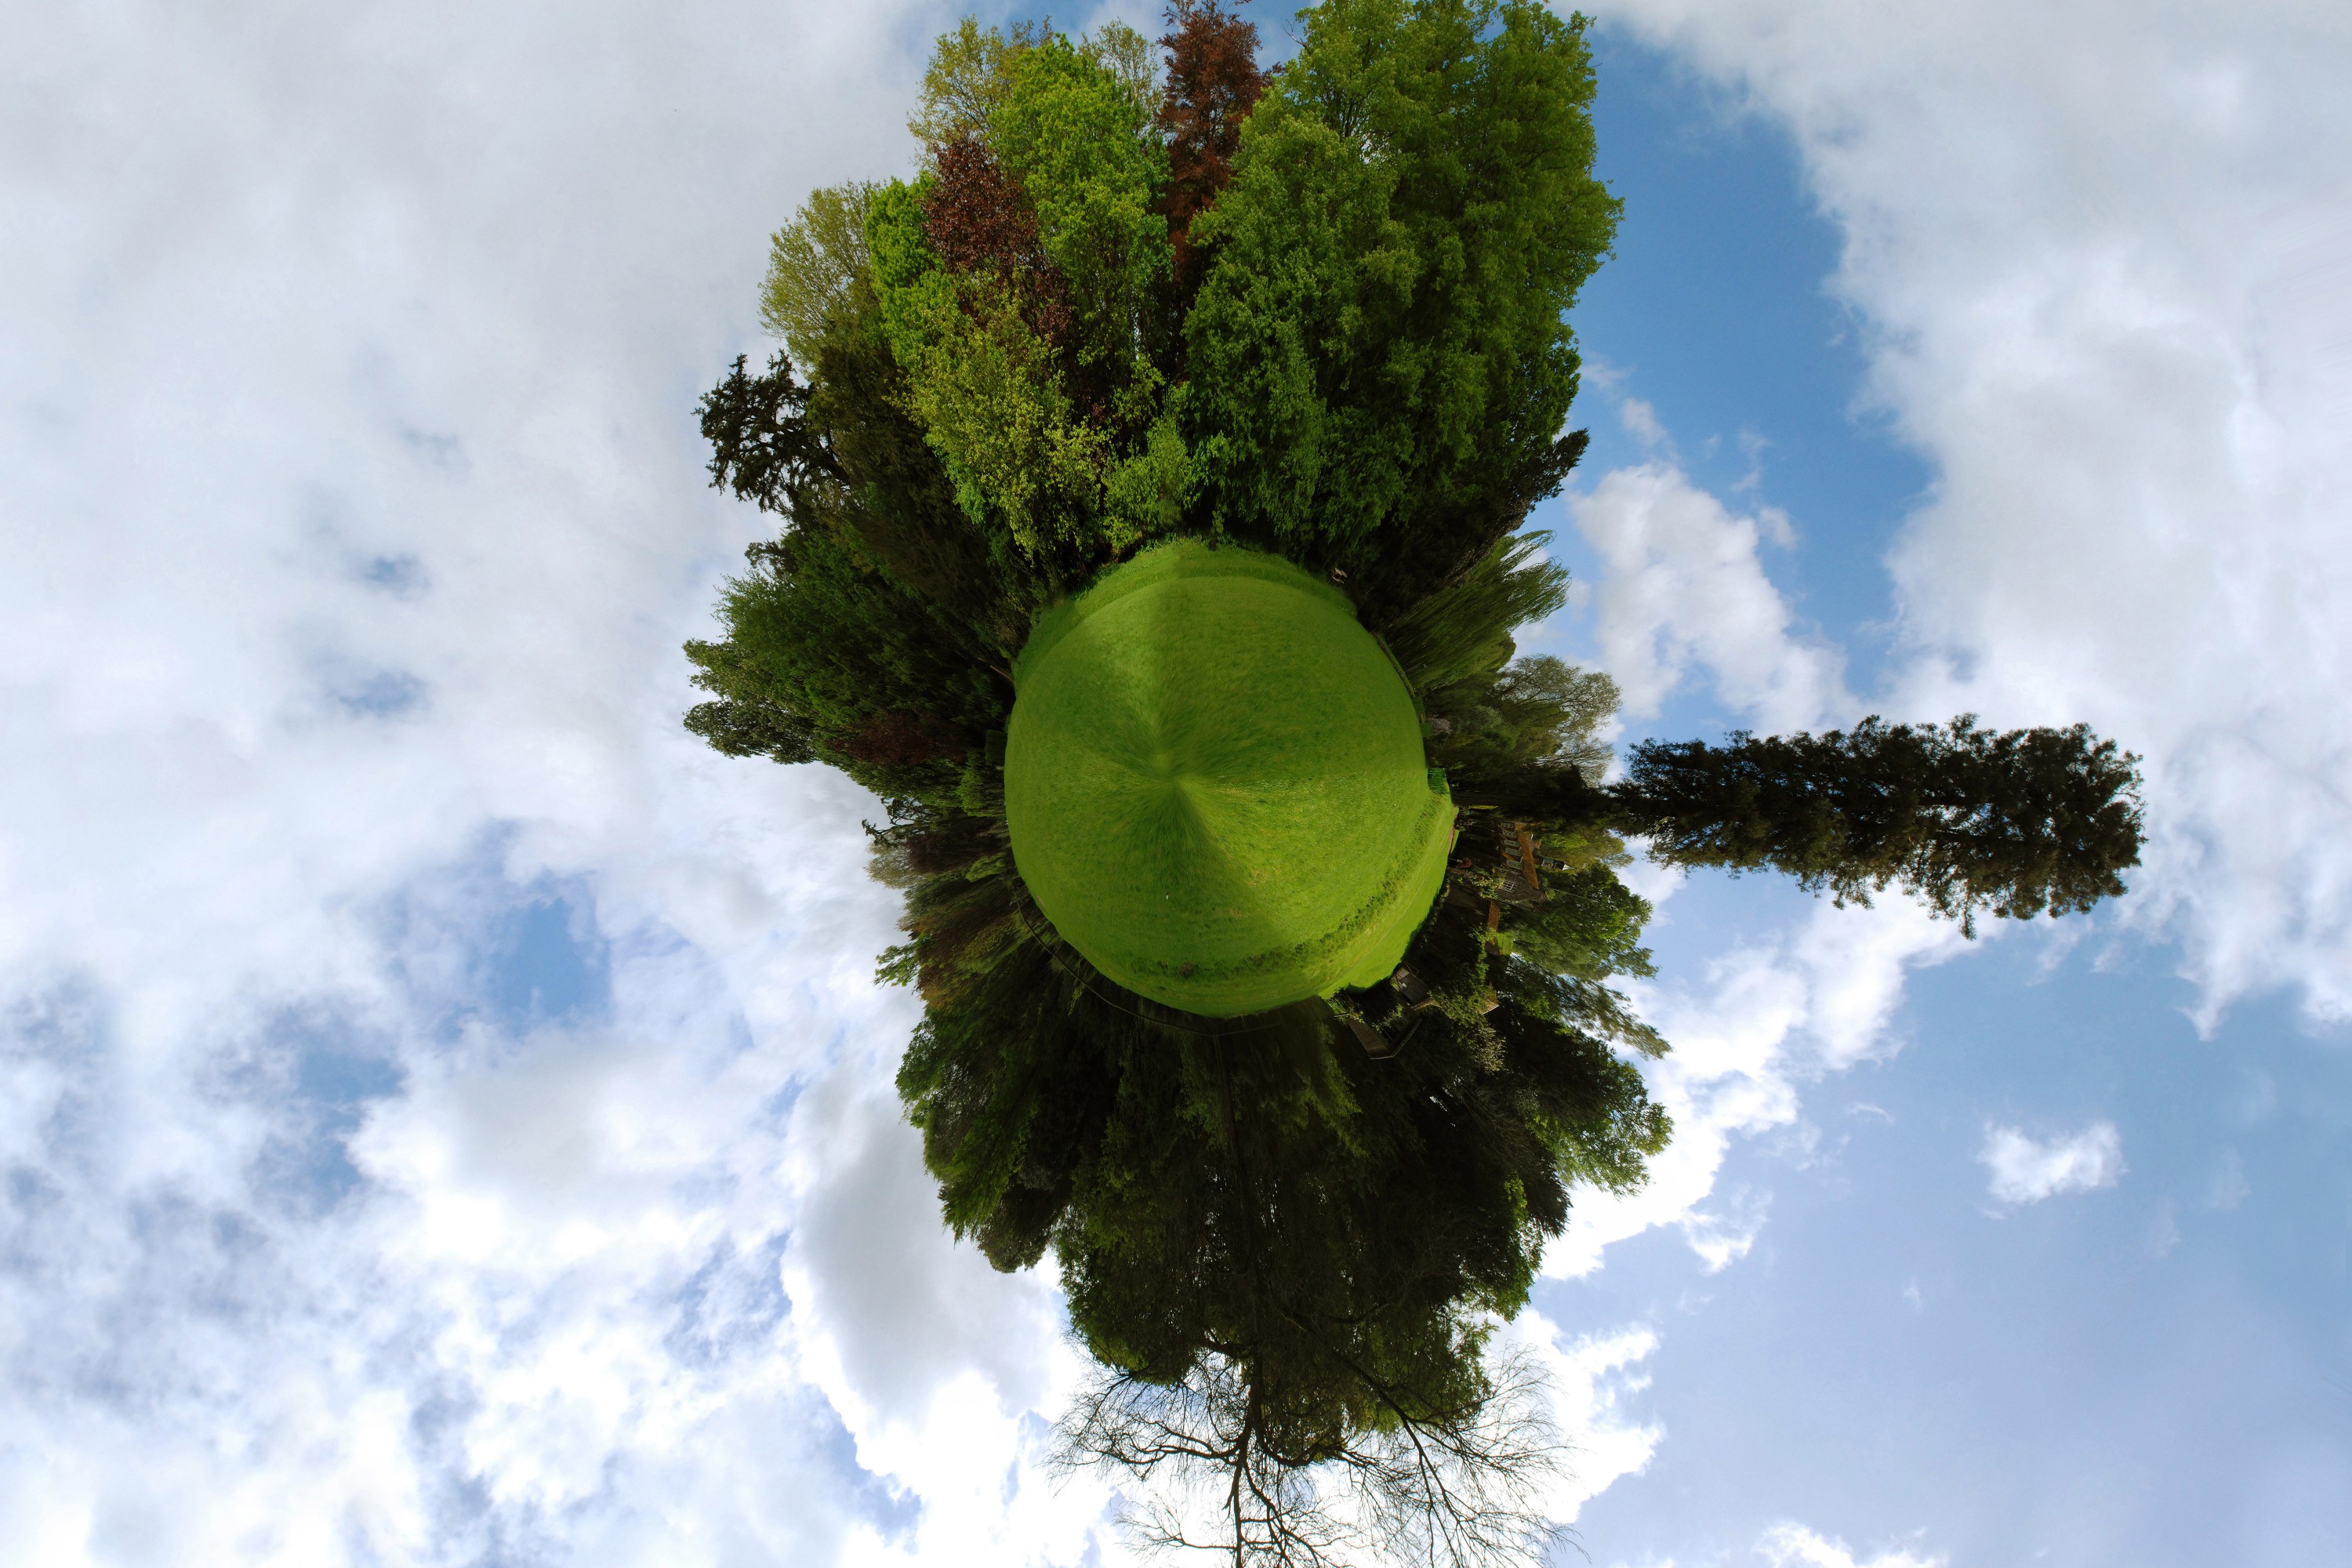 How To Turn Your Panorama Photos Into 360-Degree Little Planet Images